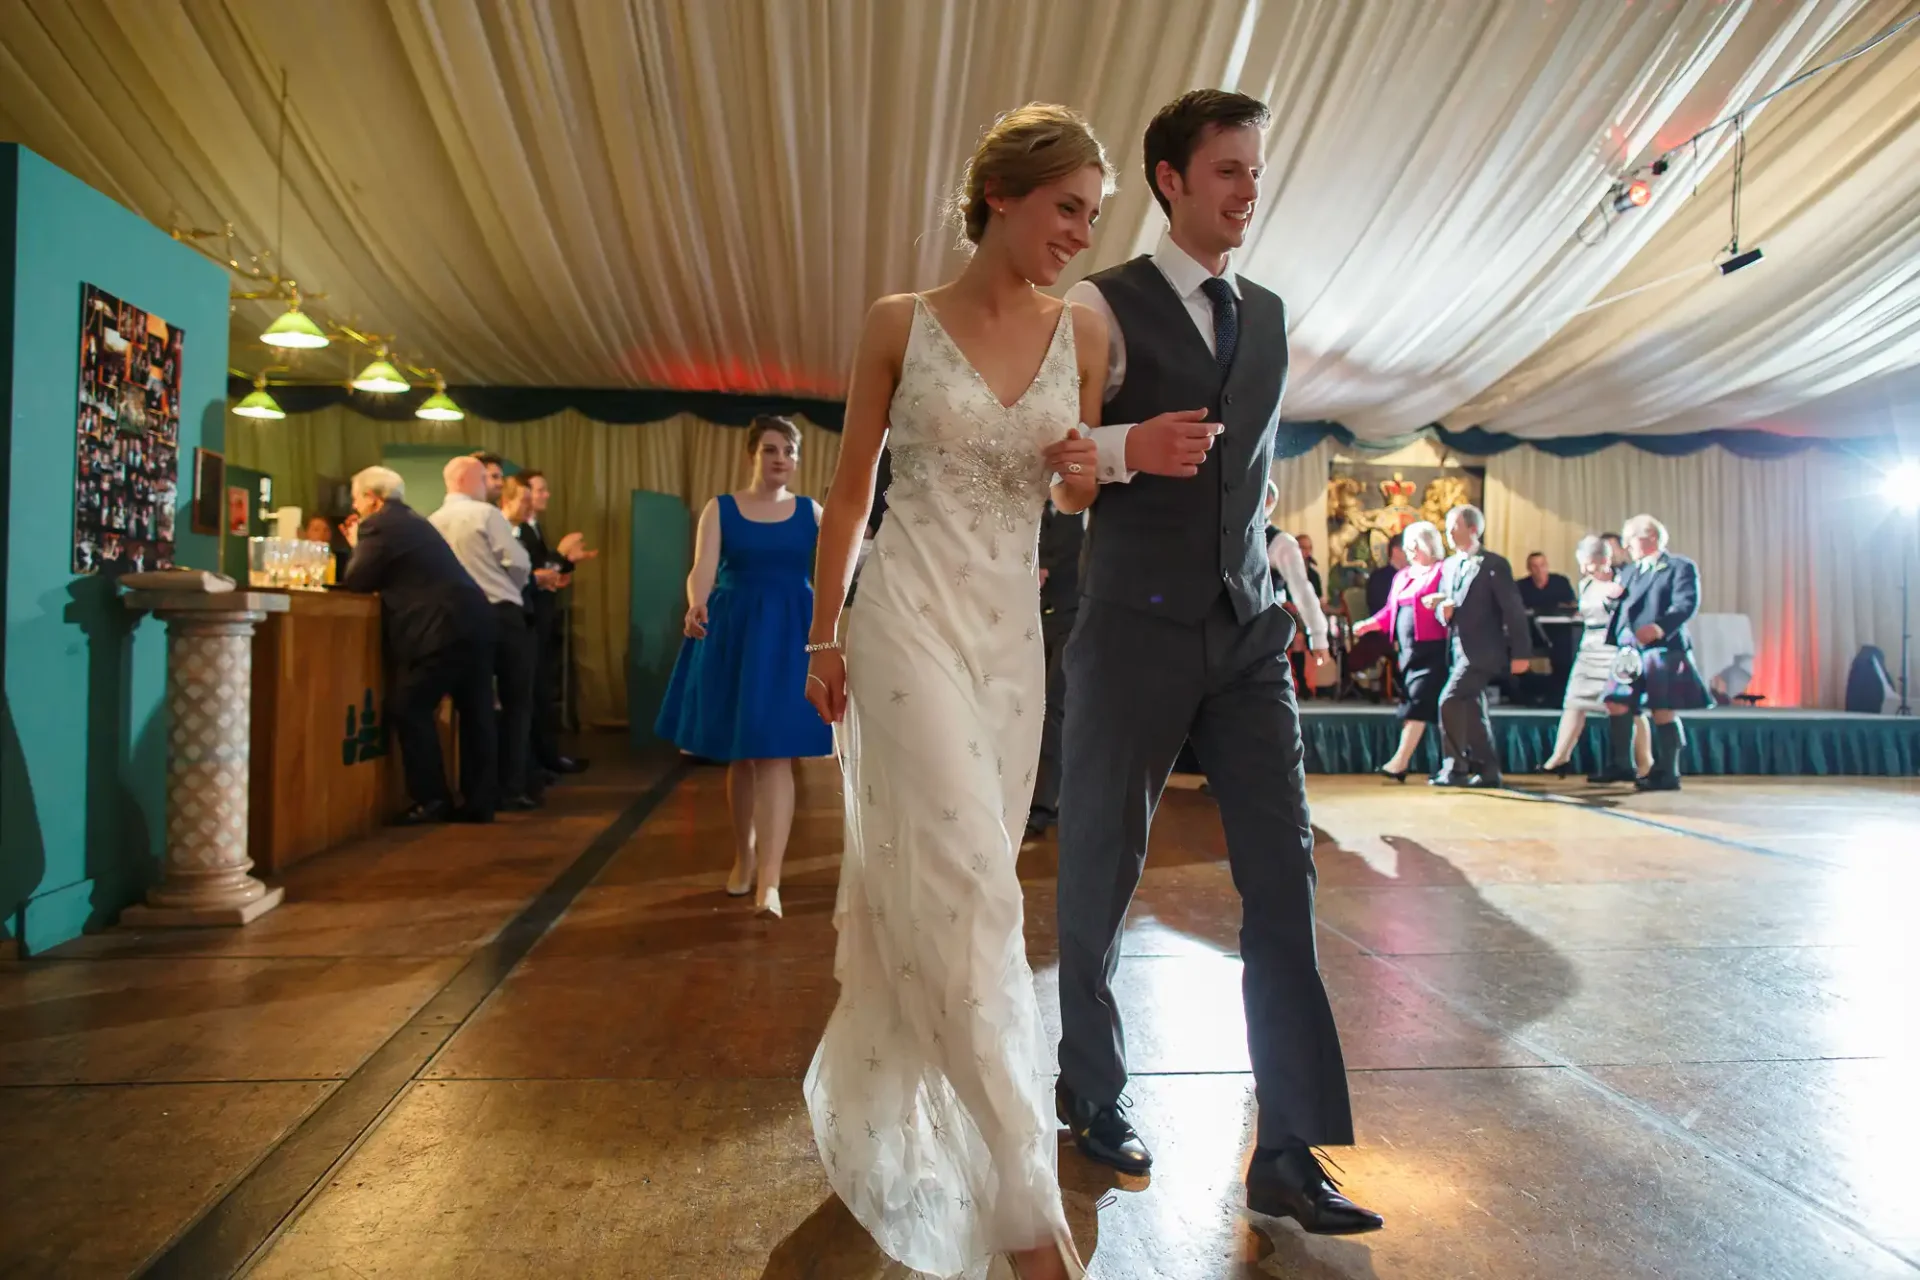 A young couple dances happily at a wedding reception in a tented venue, with guests in the background.